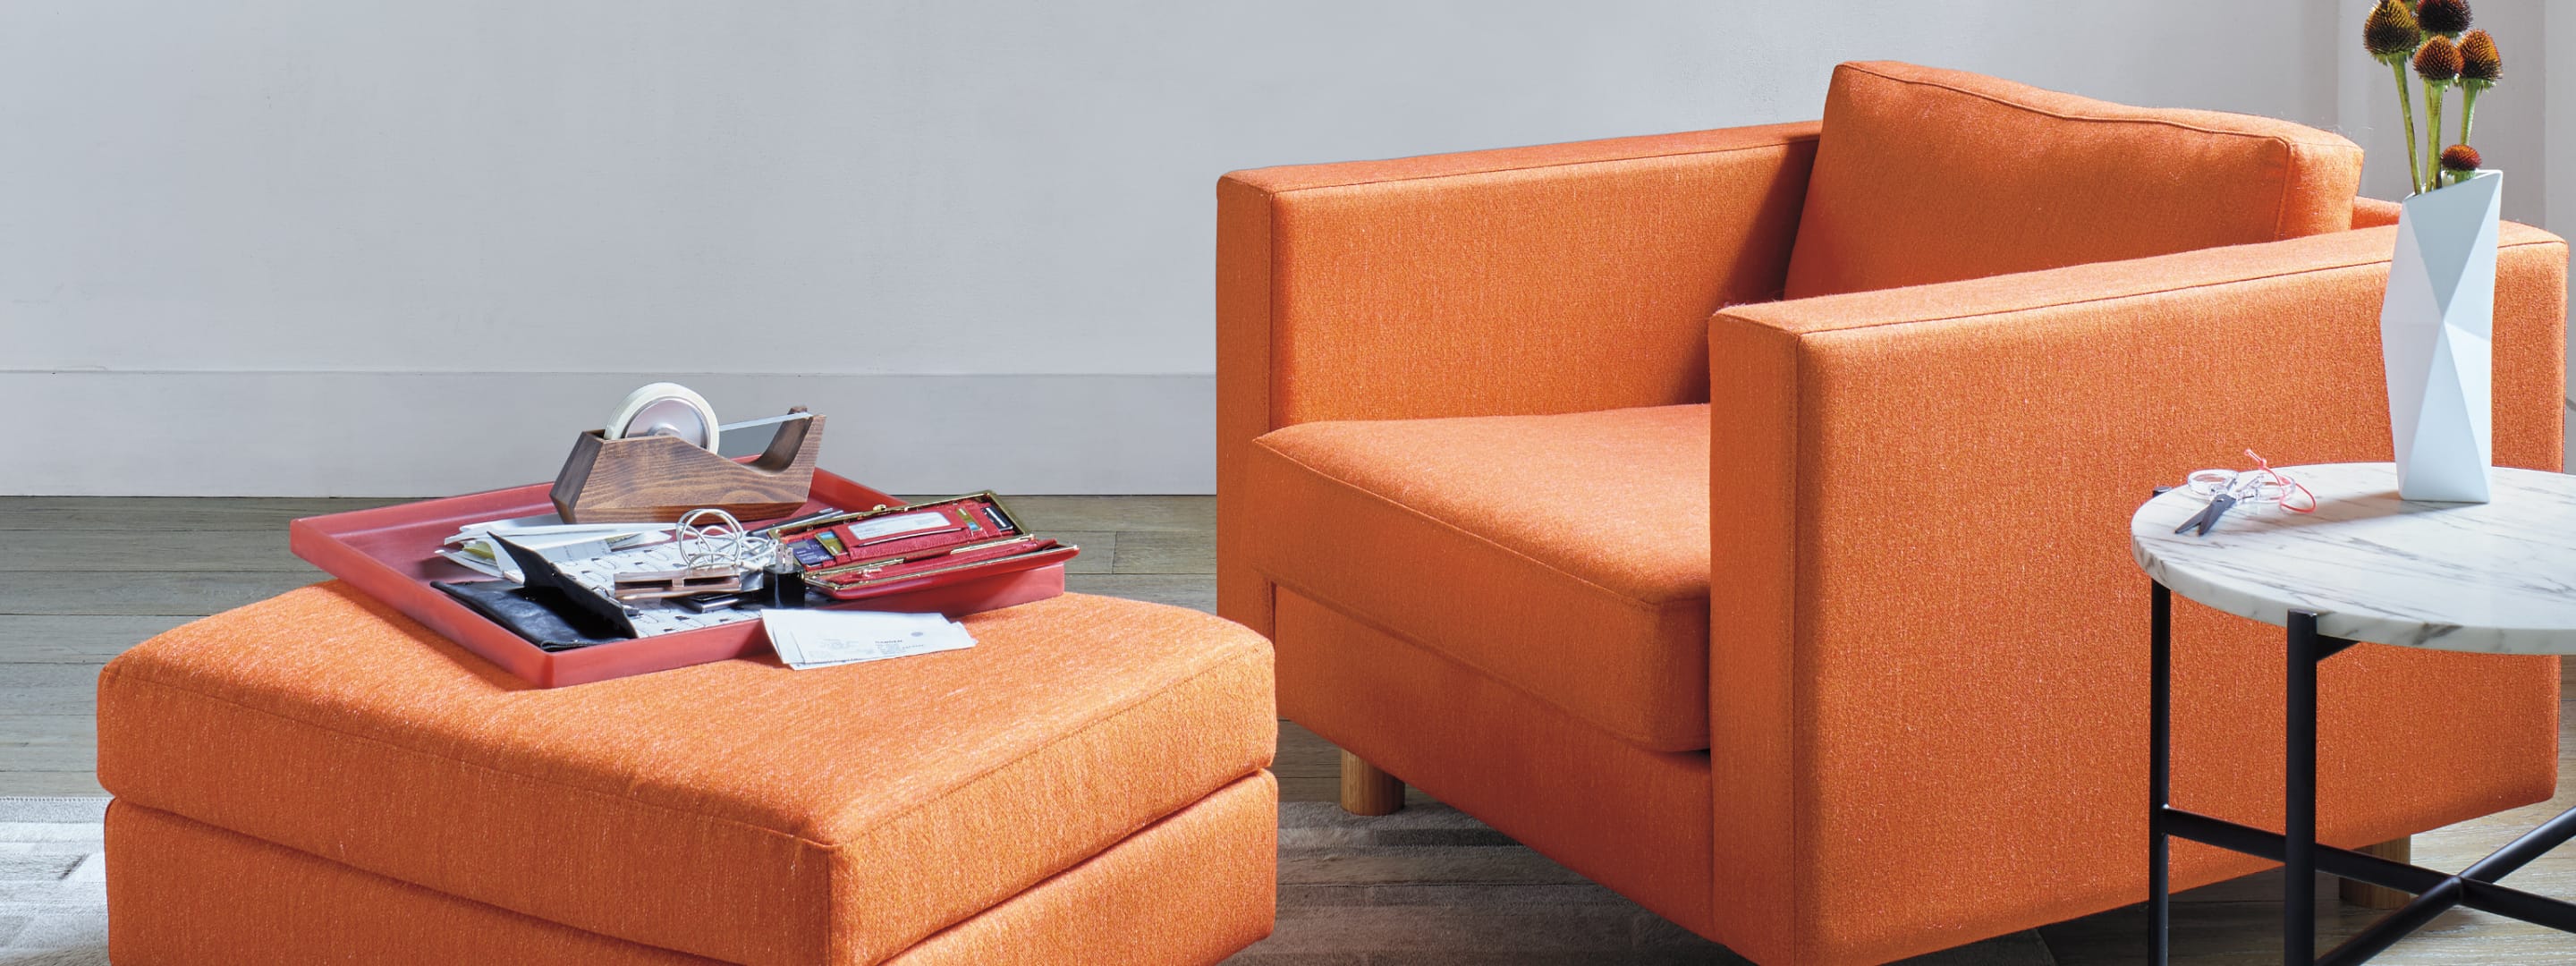 A colorful Lispenard lounge chair and ottoman in a living room.